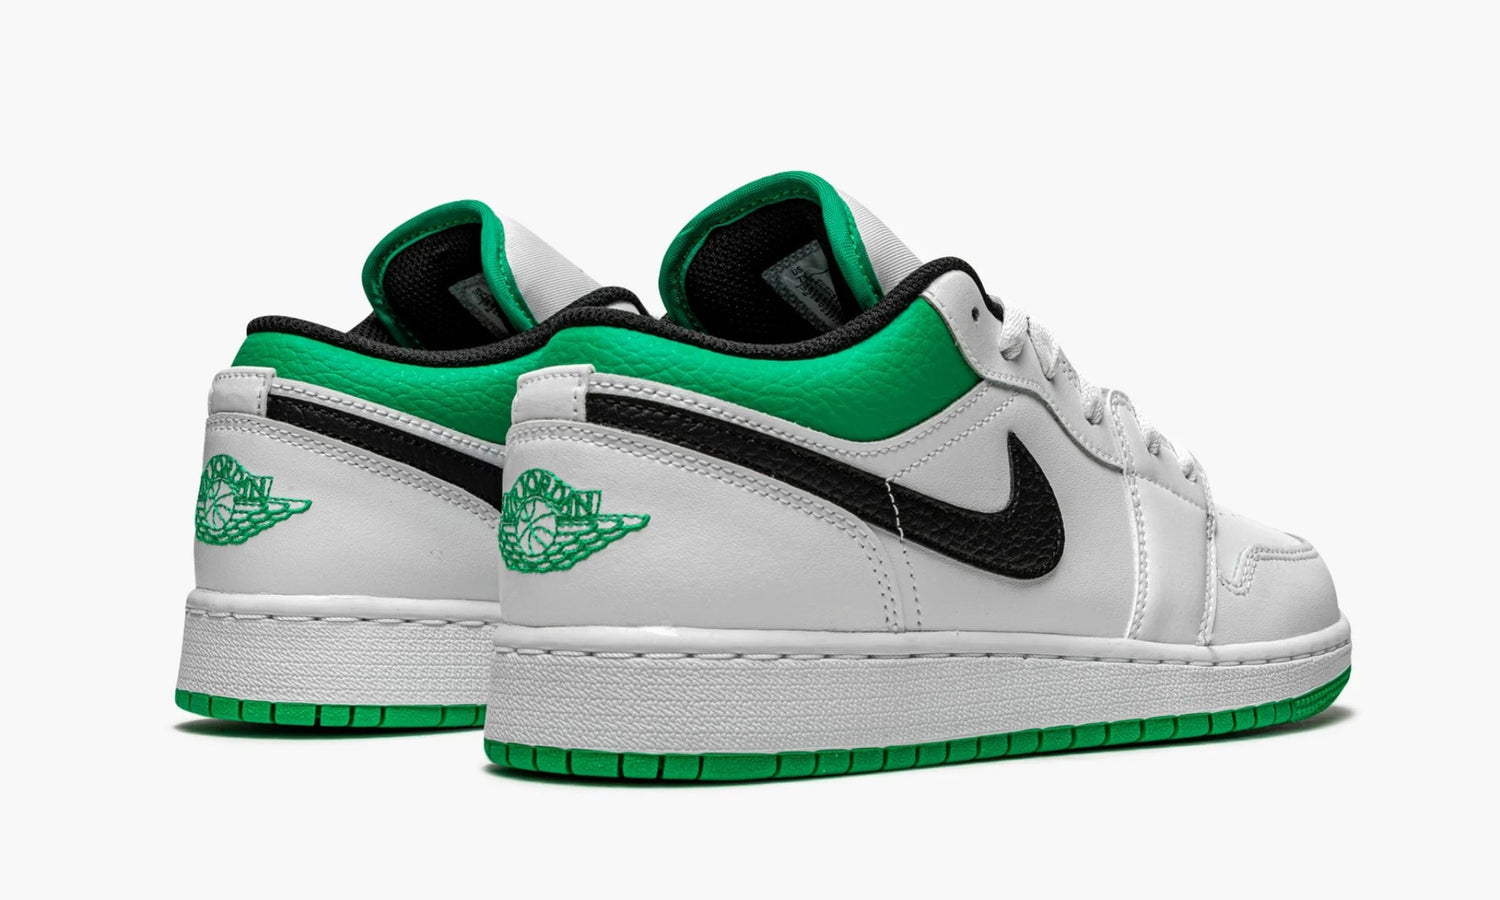 Nike Air Jordan 1 Low GS "White Lucky Green Tumbled Leather" - 553560 129 | Grailshop 